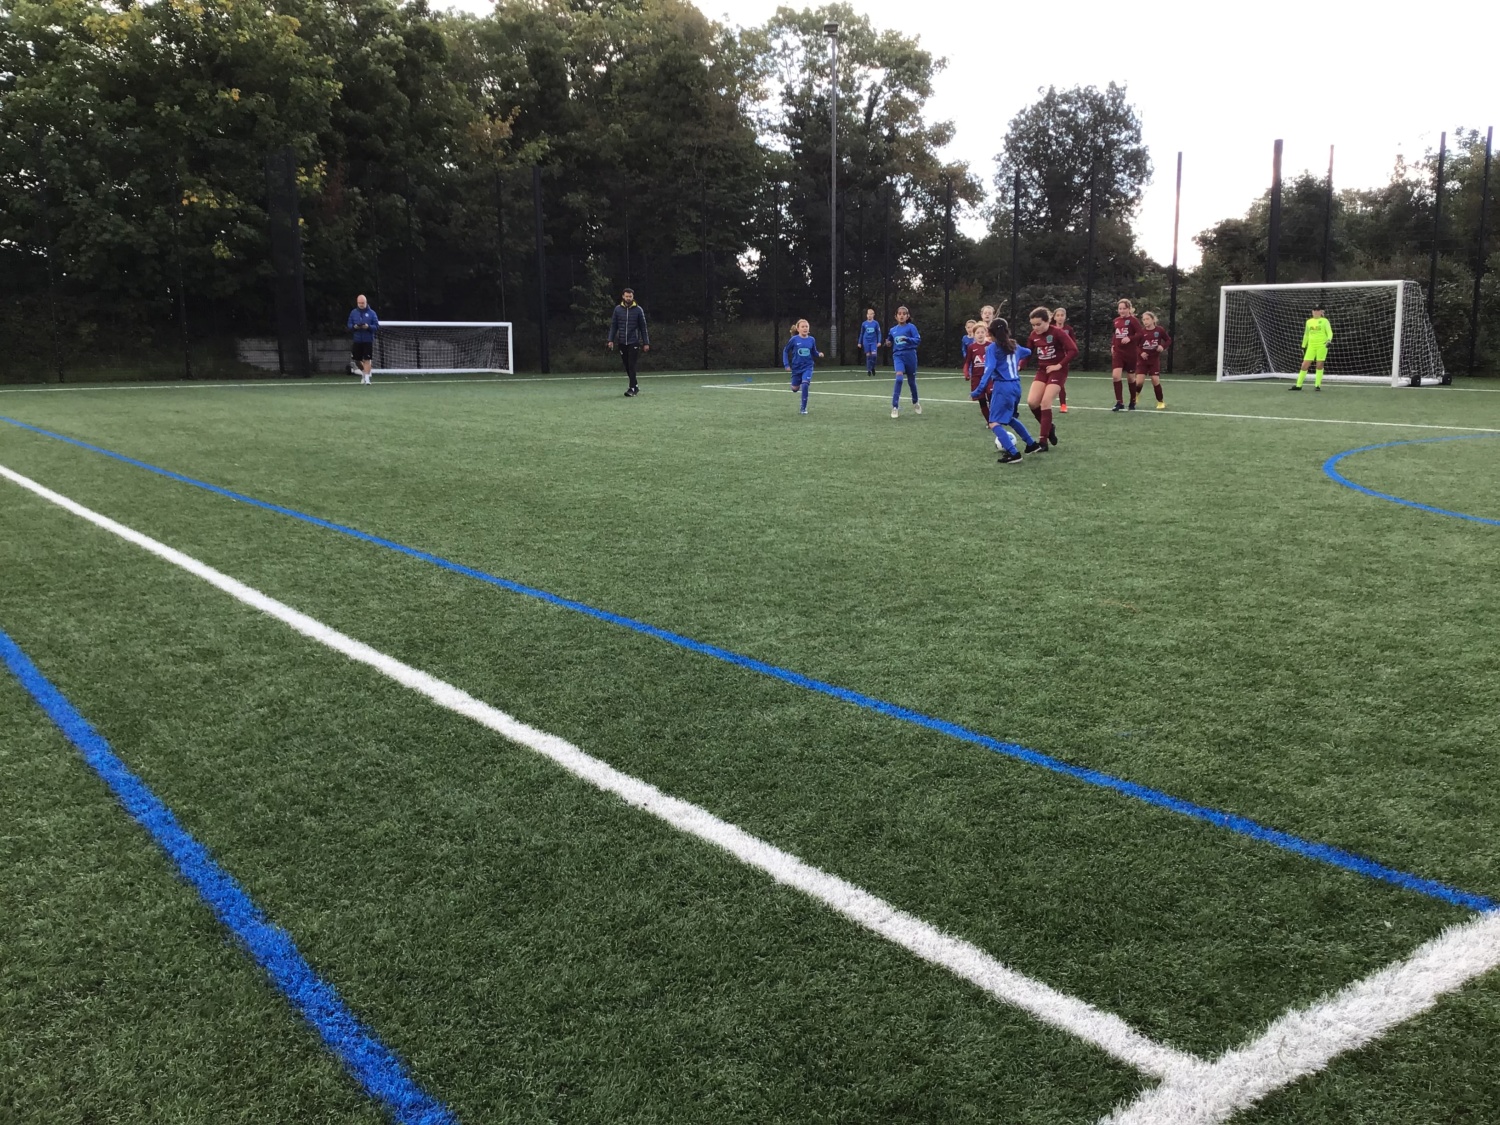 Two teams of students, in blue and red kits, playing football on a football pitch